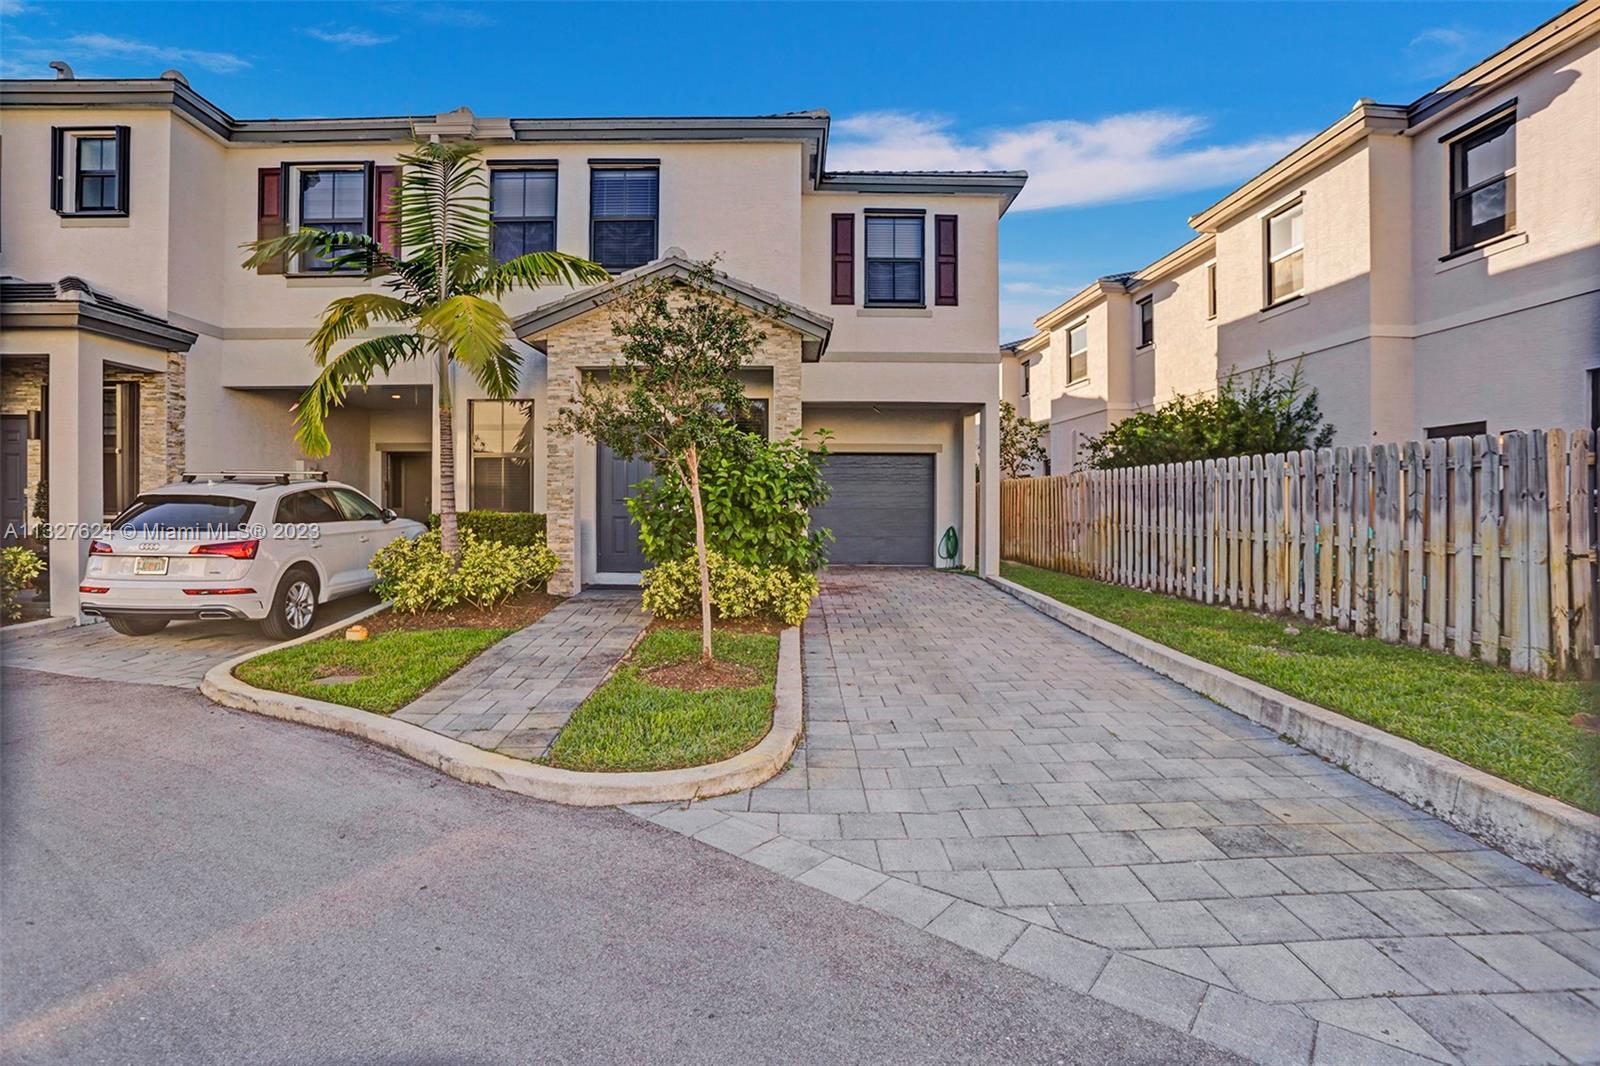 New Smart Town Home 3be/2.5ba 1 car garage in Ft. Lauderdale, paved driveway for up to 2, Corner uni